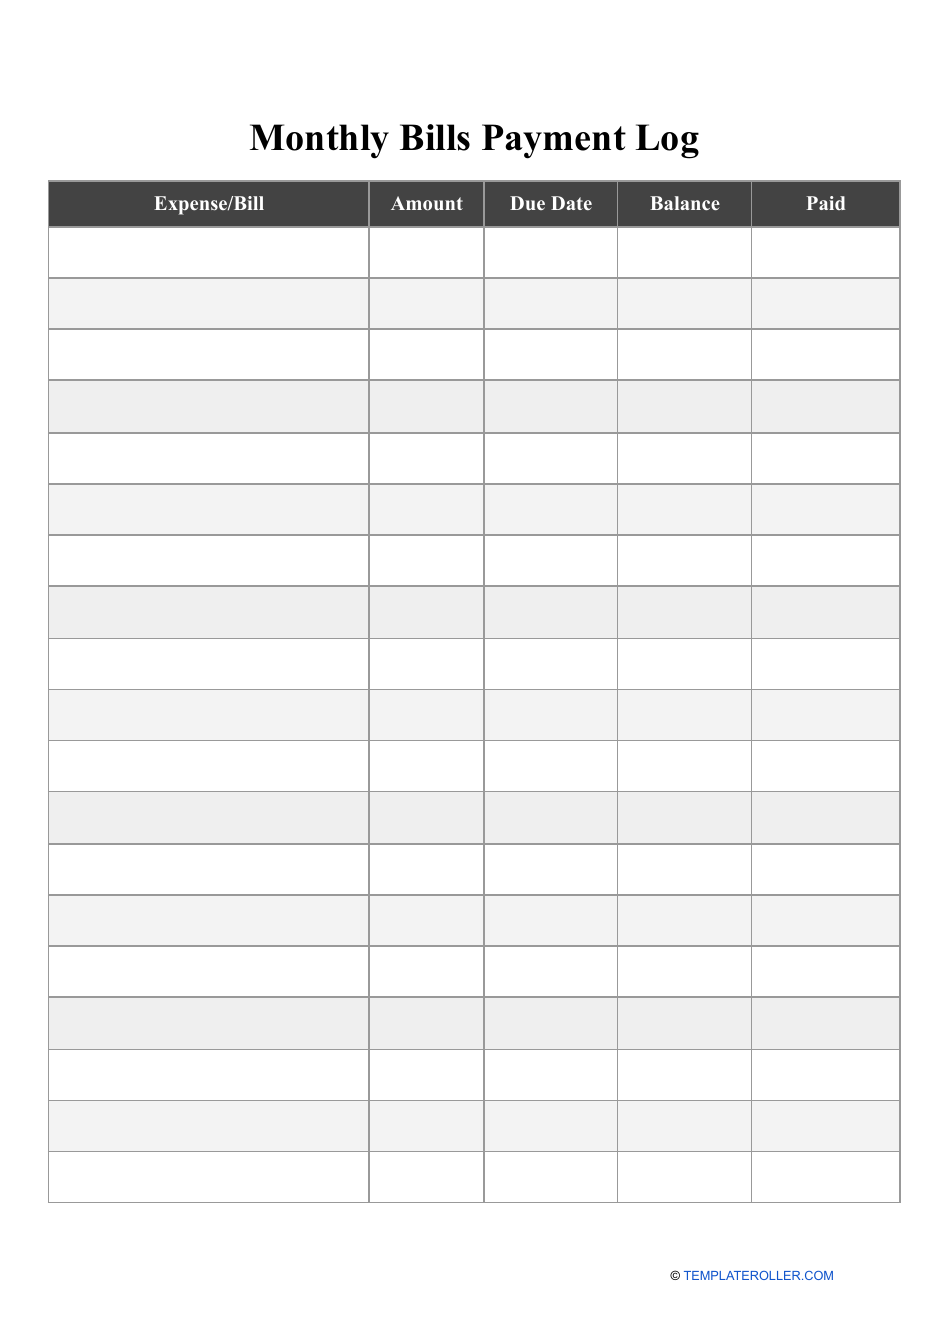 monthly-bills-payment-log-template-download-printable-pdf-templateroller